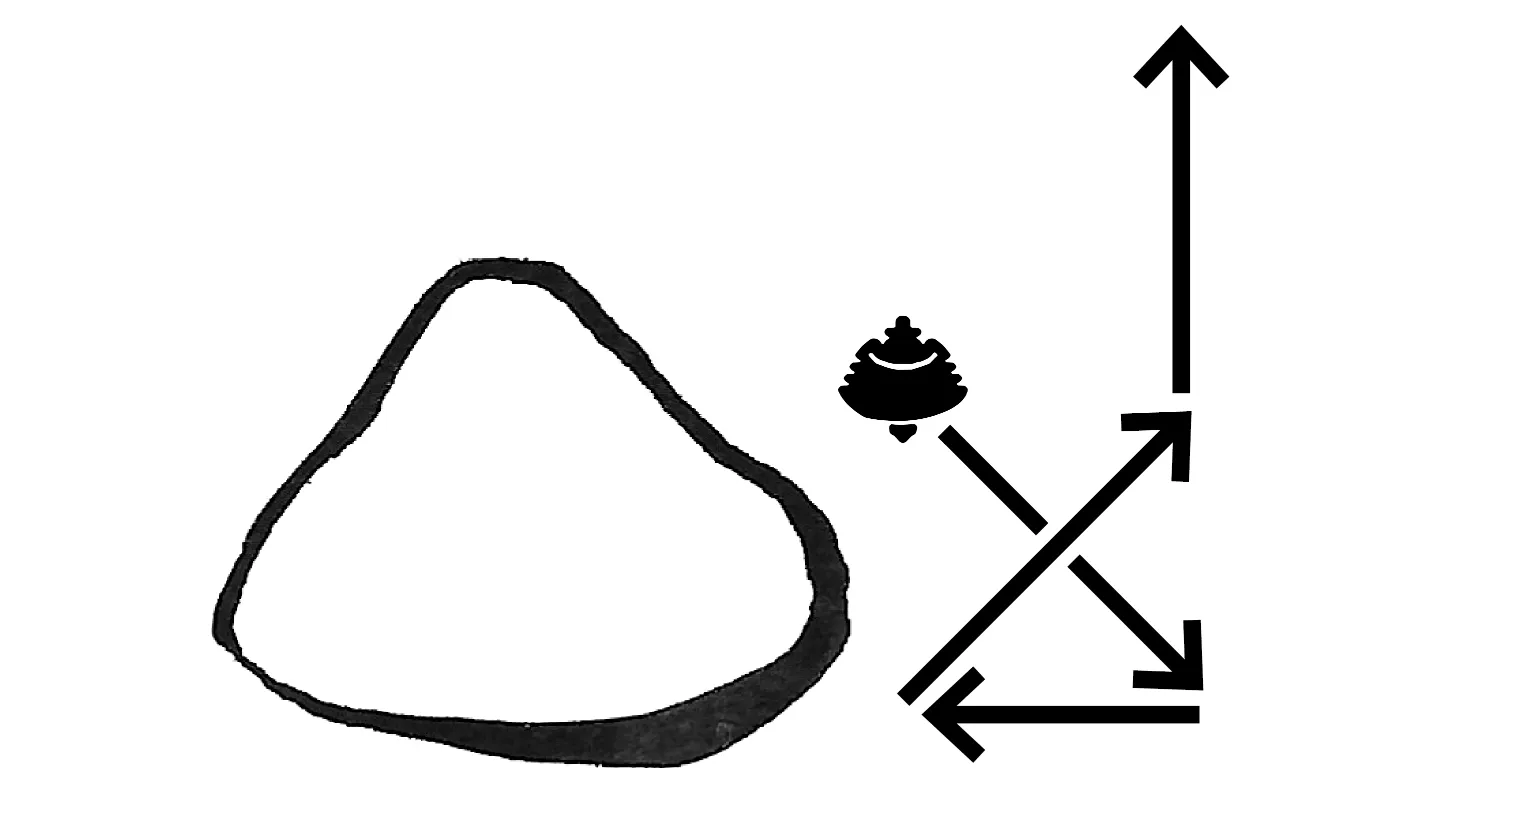 illustration: the Lantern piece and simplified movement diagram